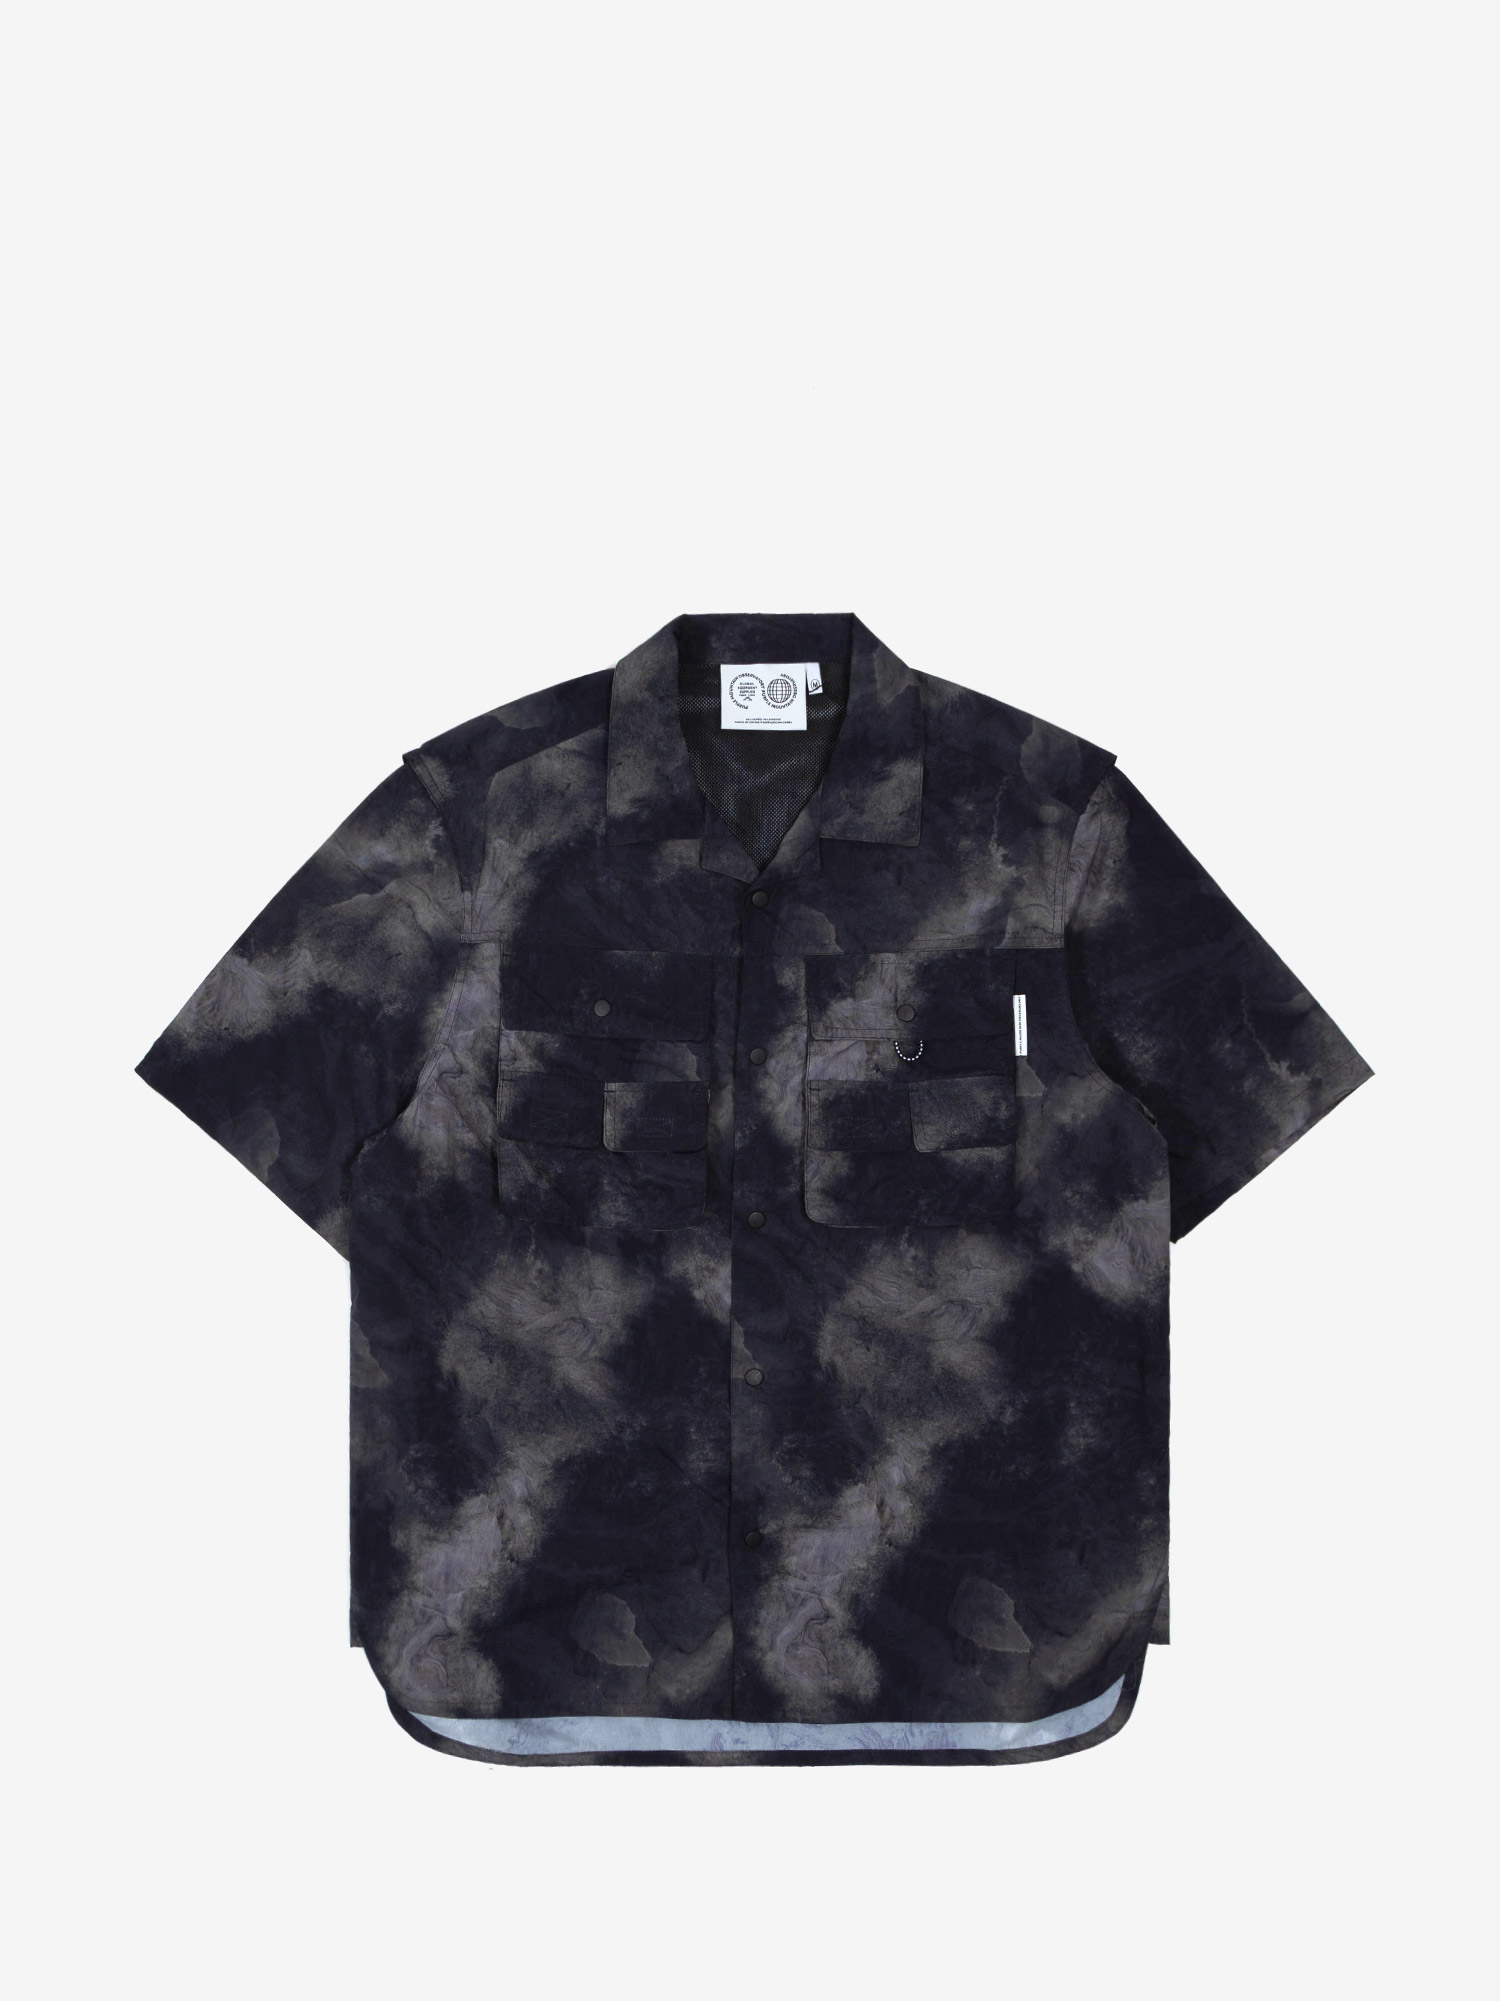 Featured image for “TRAIL MULTI POCKET SHIRT SMOKE TEXTURE PRINT”